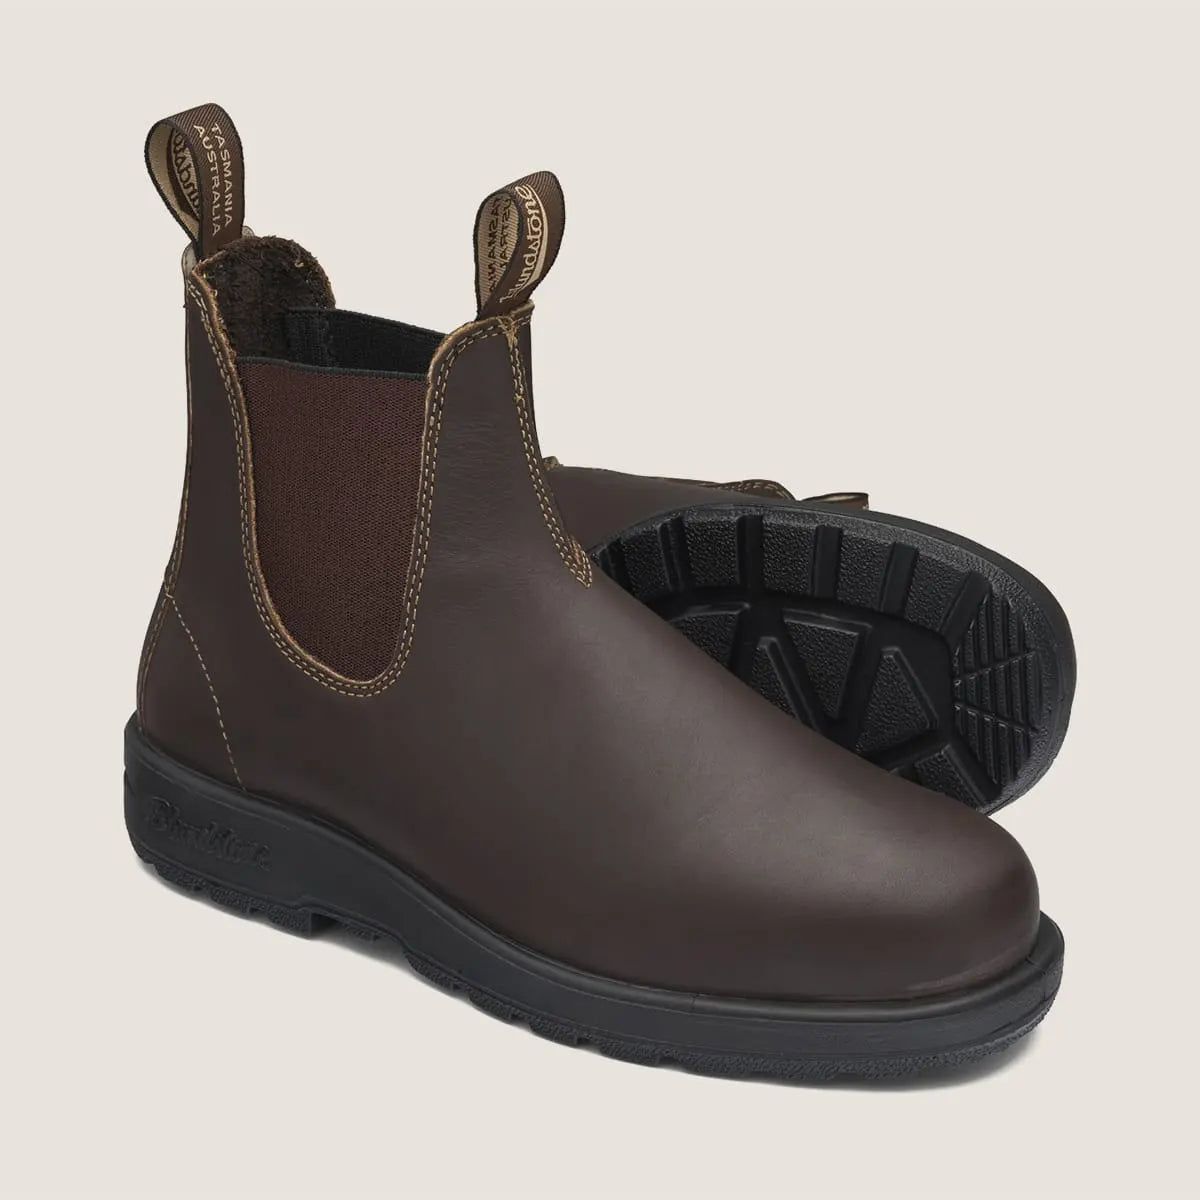 Brown Elastic Side Soft Toe Work Boots - made by Blundstone